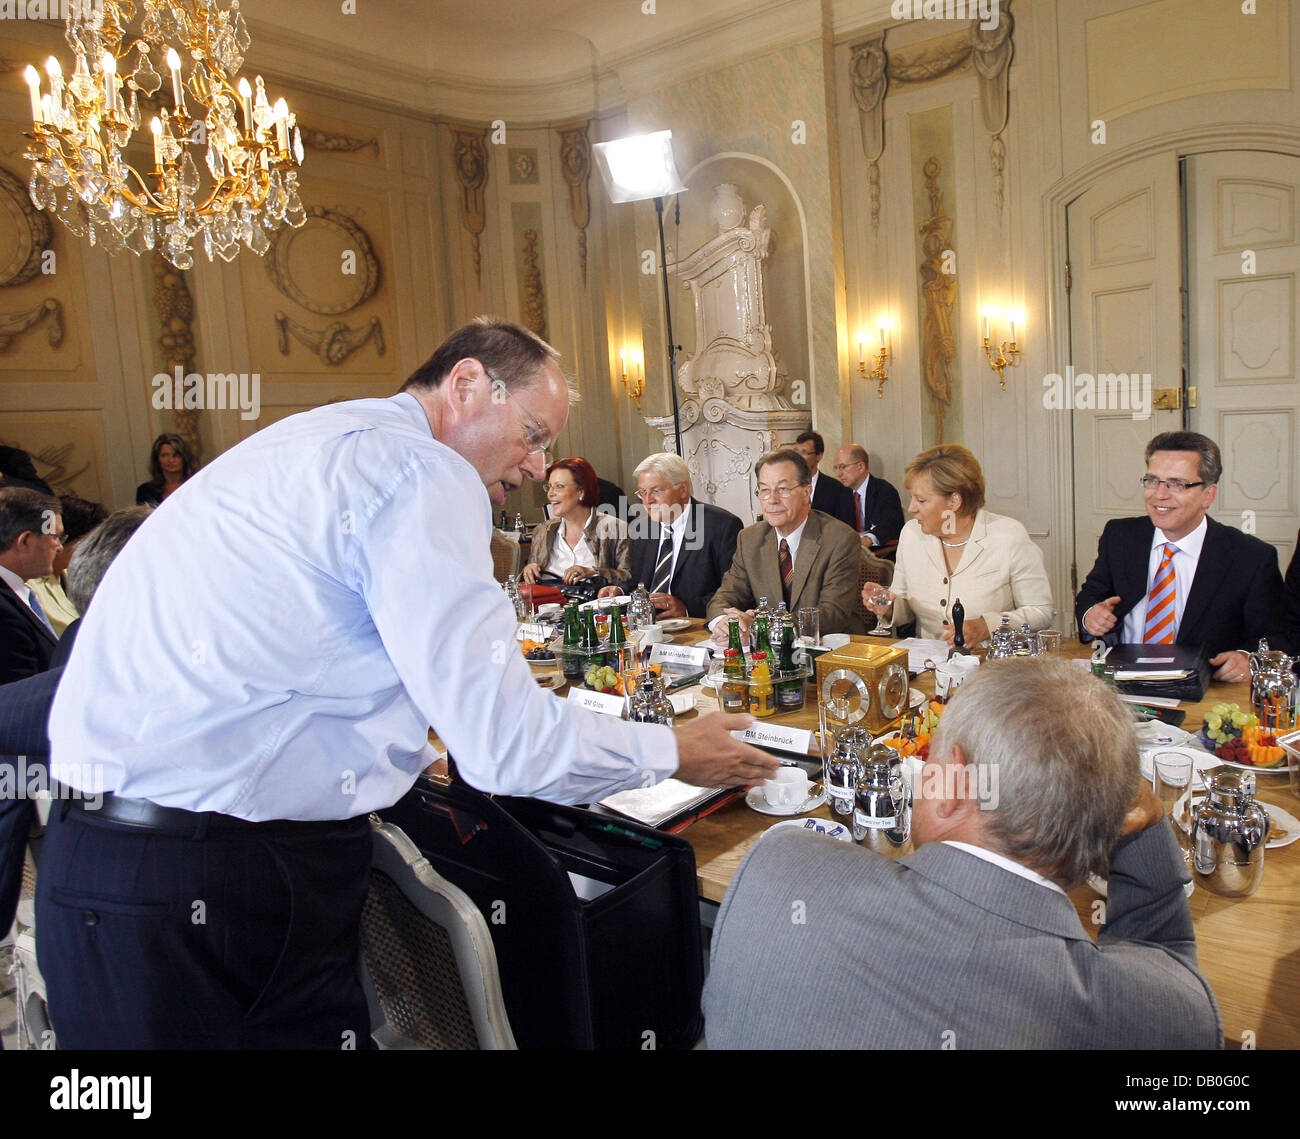 German Minister of Finances, Peer Steinbrueck (L) talks with the Minister of the Interior, Wolfgang Schaeuble (R), during a German cabinet meeting in Meseberg, Germany, 23 August 2007. The cabinet members are scheduled to discuss on energy and immigration politics. Photo: Bernd Settnik Stock Photo